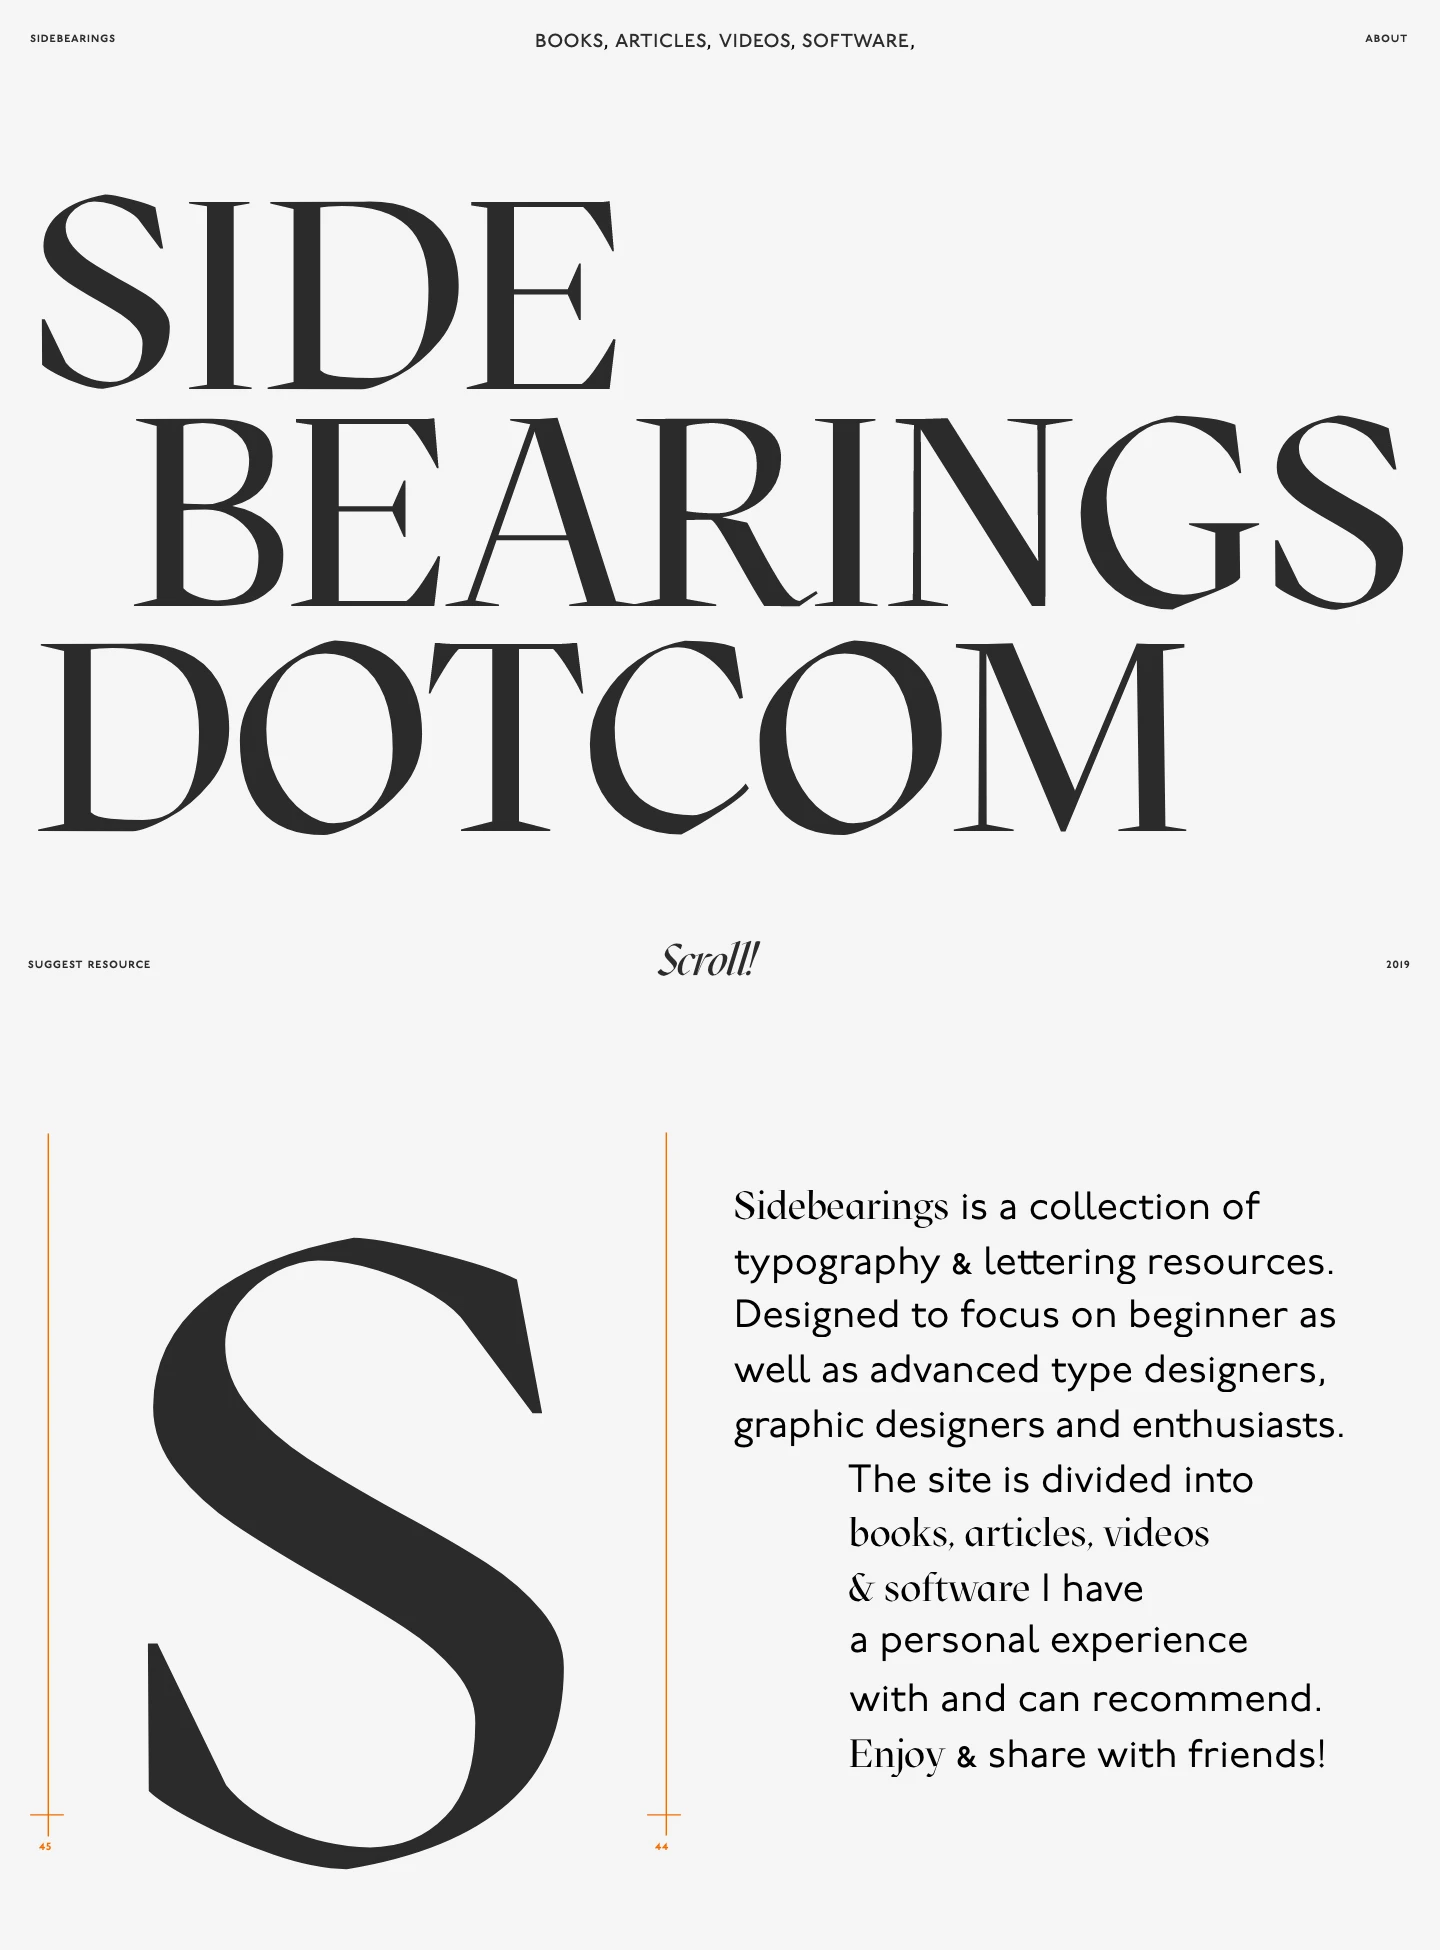 Sidebearings Landing Page Example: Sidebearings is a collection oftypography & lettering resources.Designed to focus on beginner aswell as advanced type designers,graphic designers and enthusiasts.